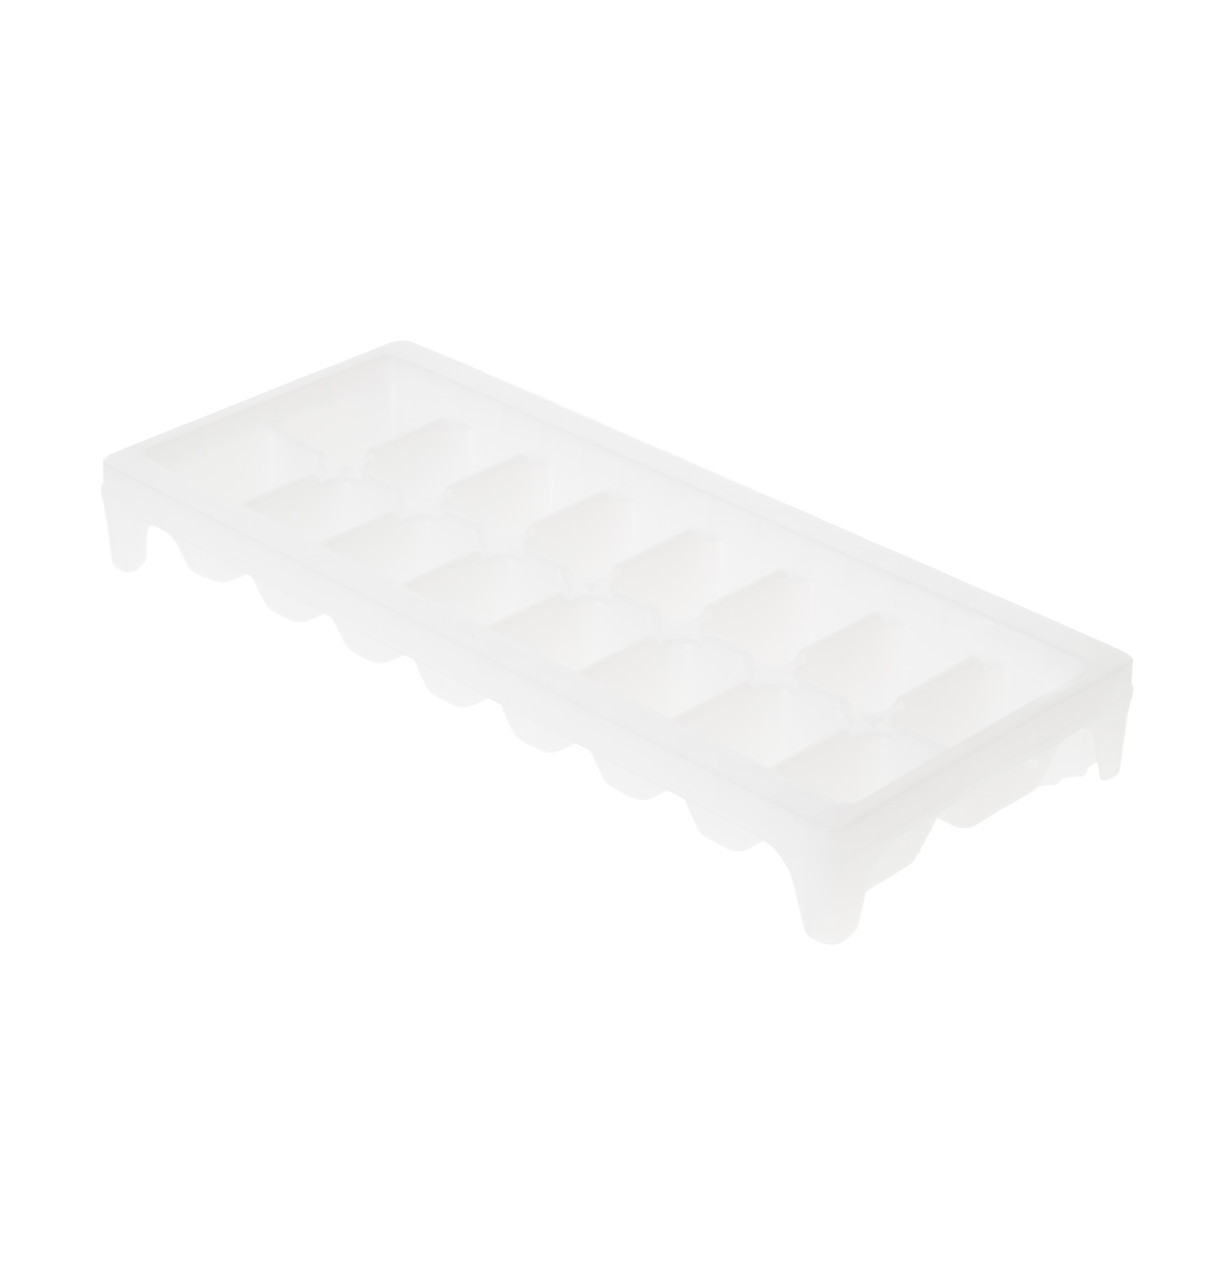 Ice cube tray - WR30X311 - Cafe Appliances